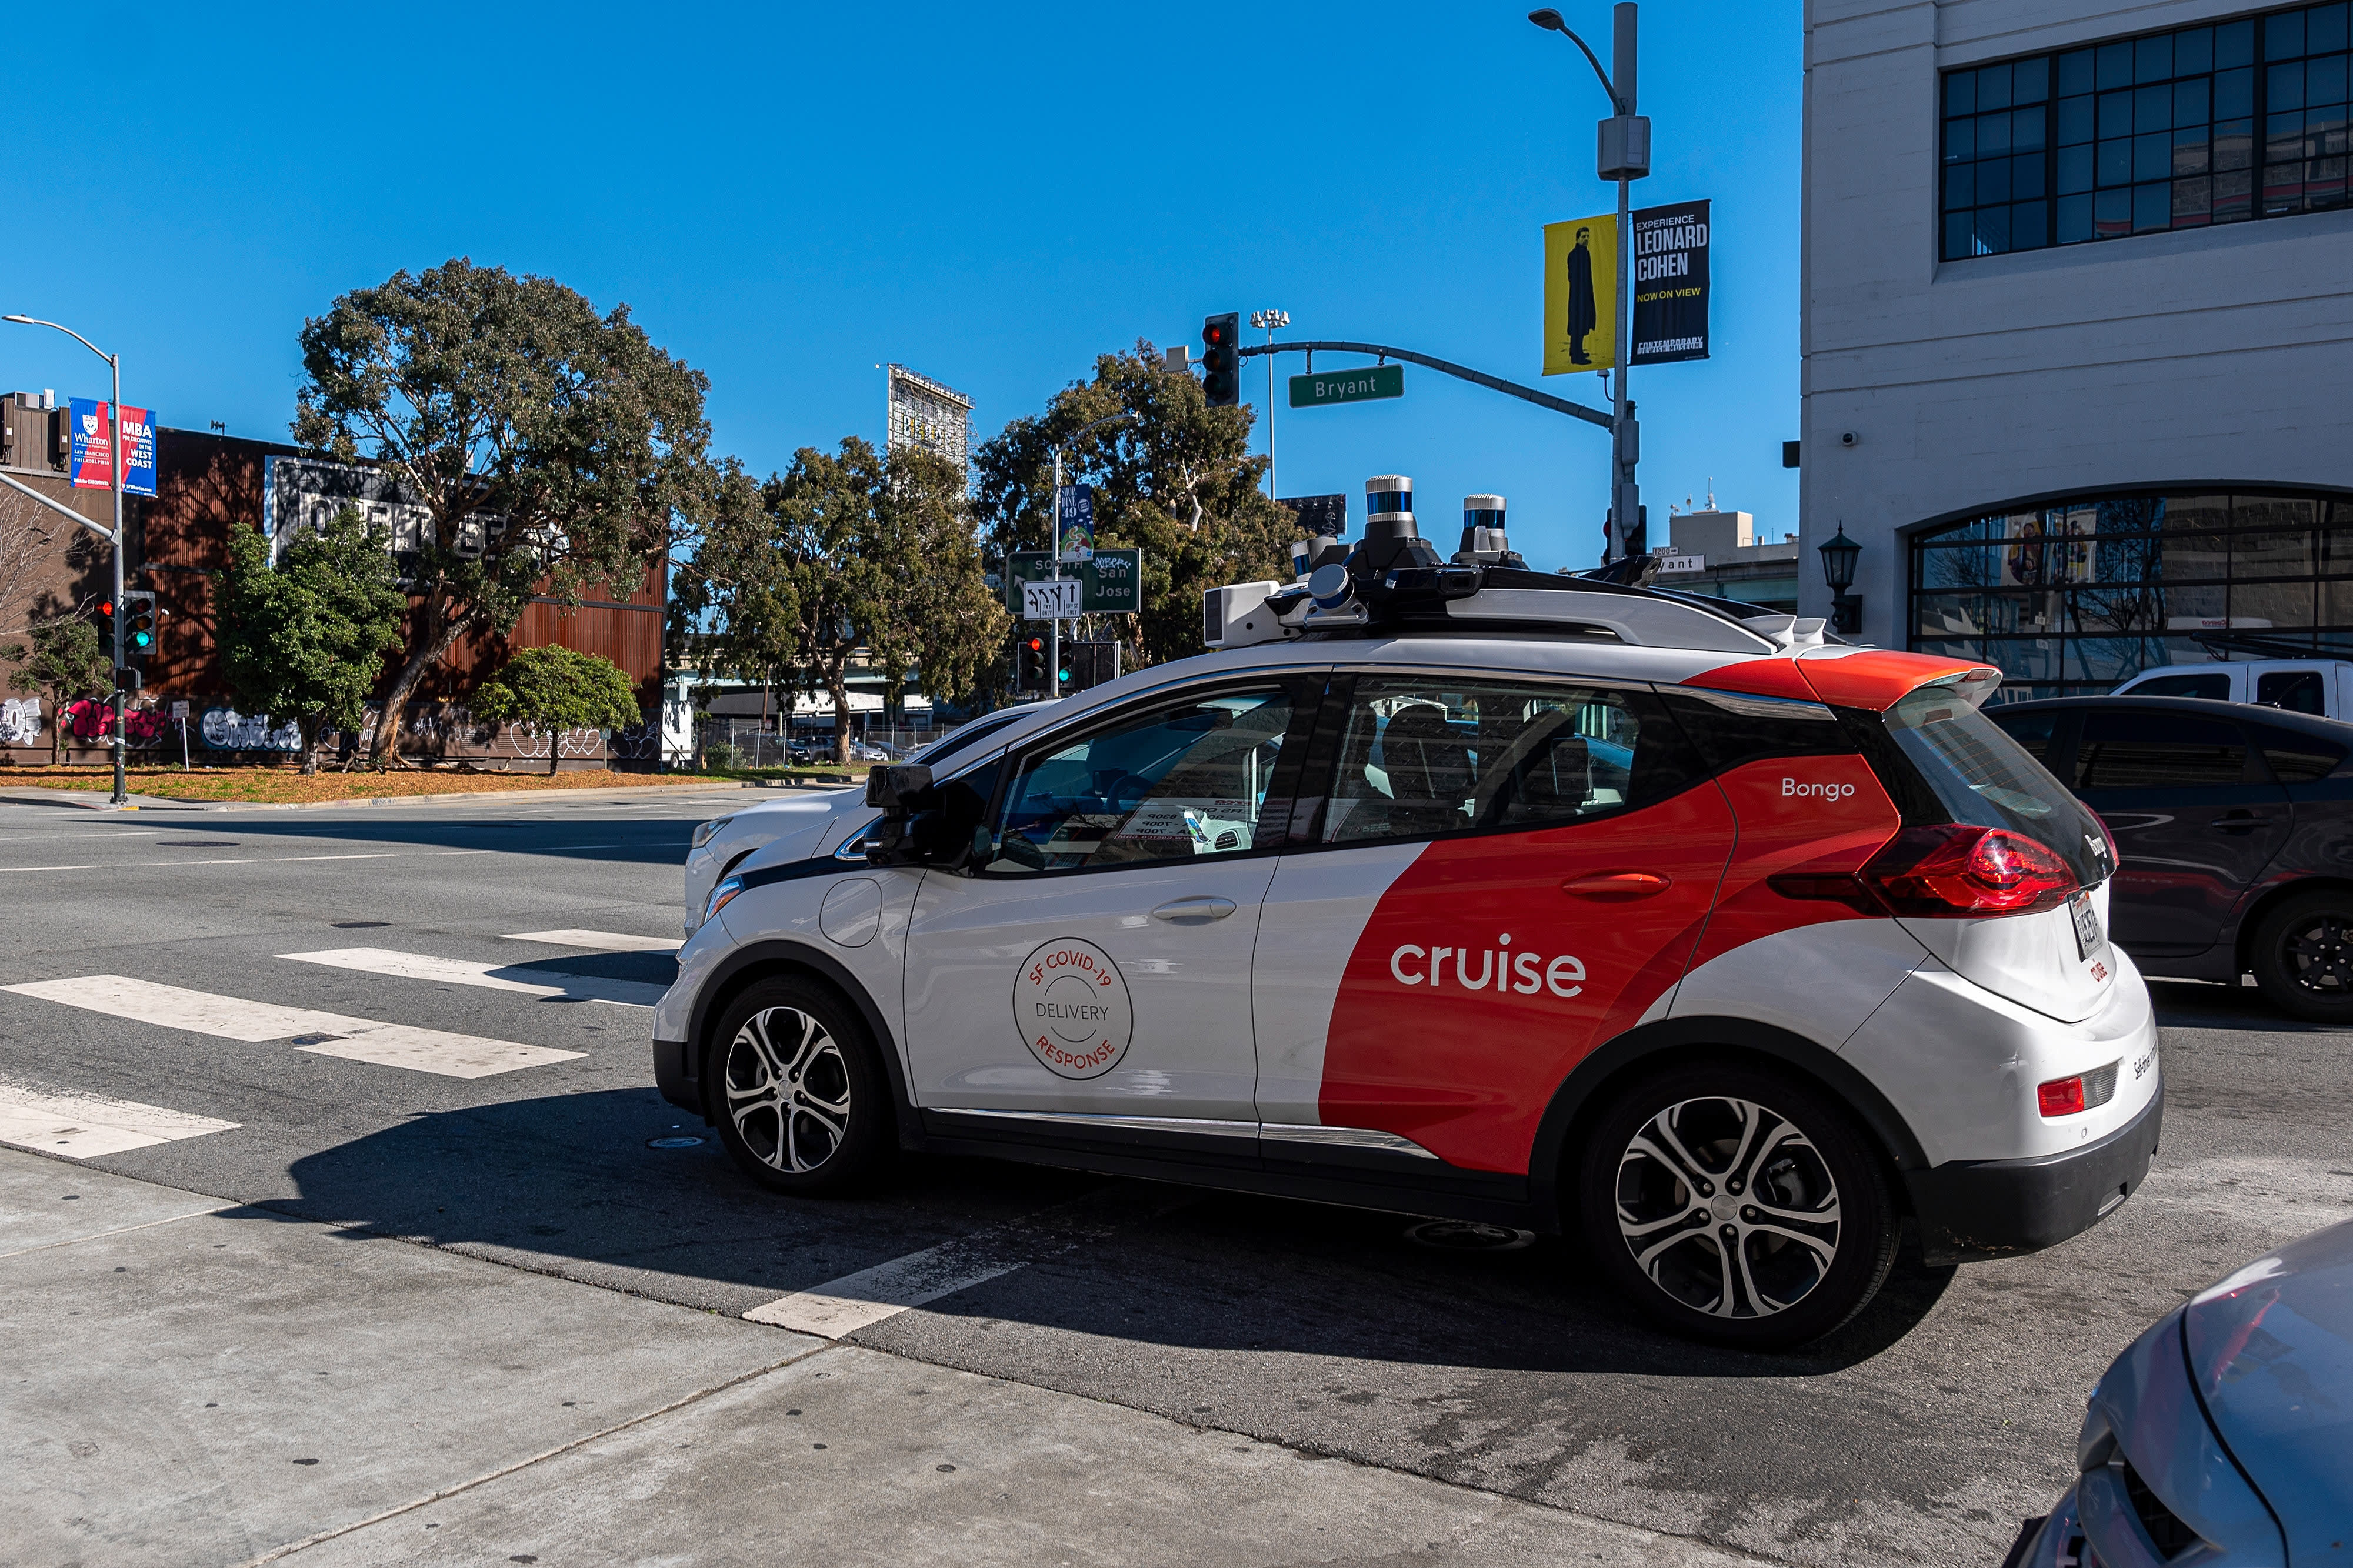 The Cruise system temporarily stops all driverless operations after collisions and holds